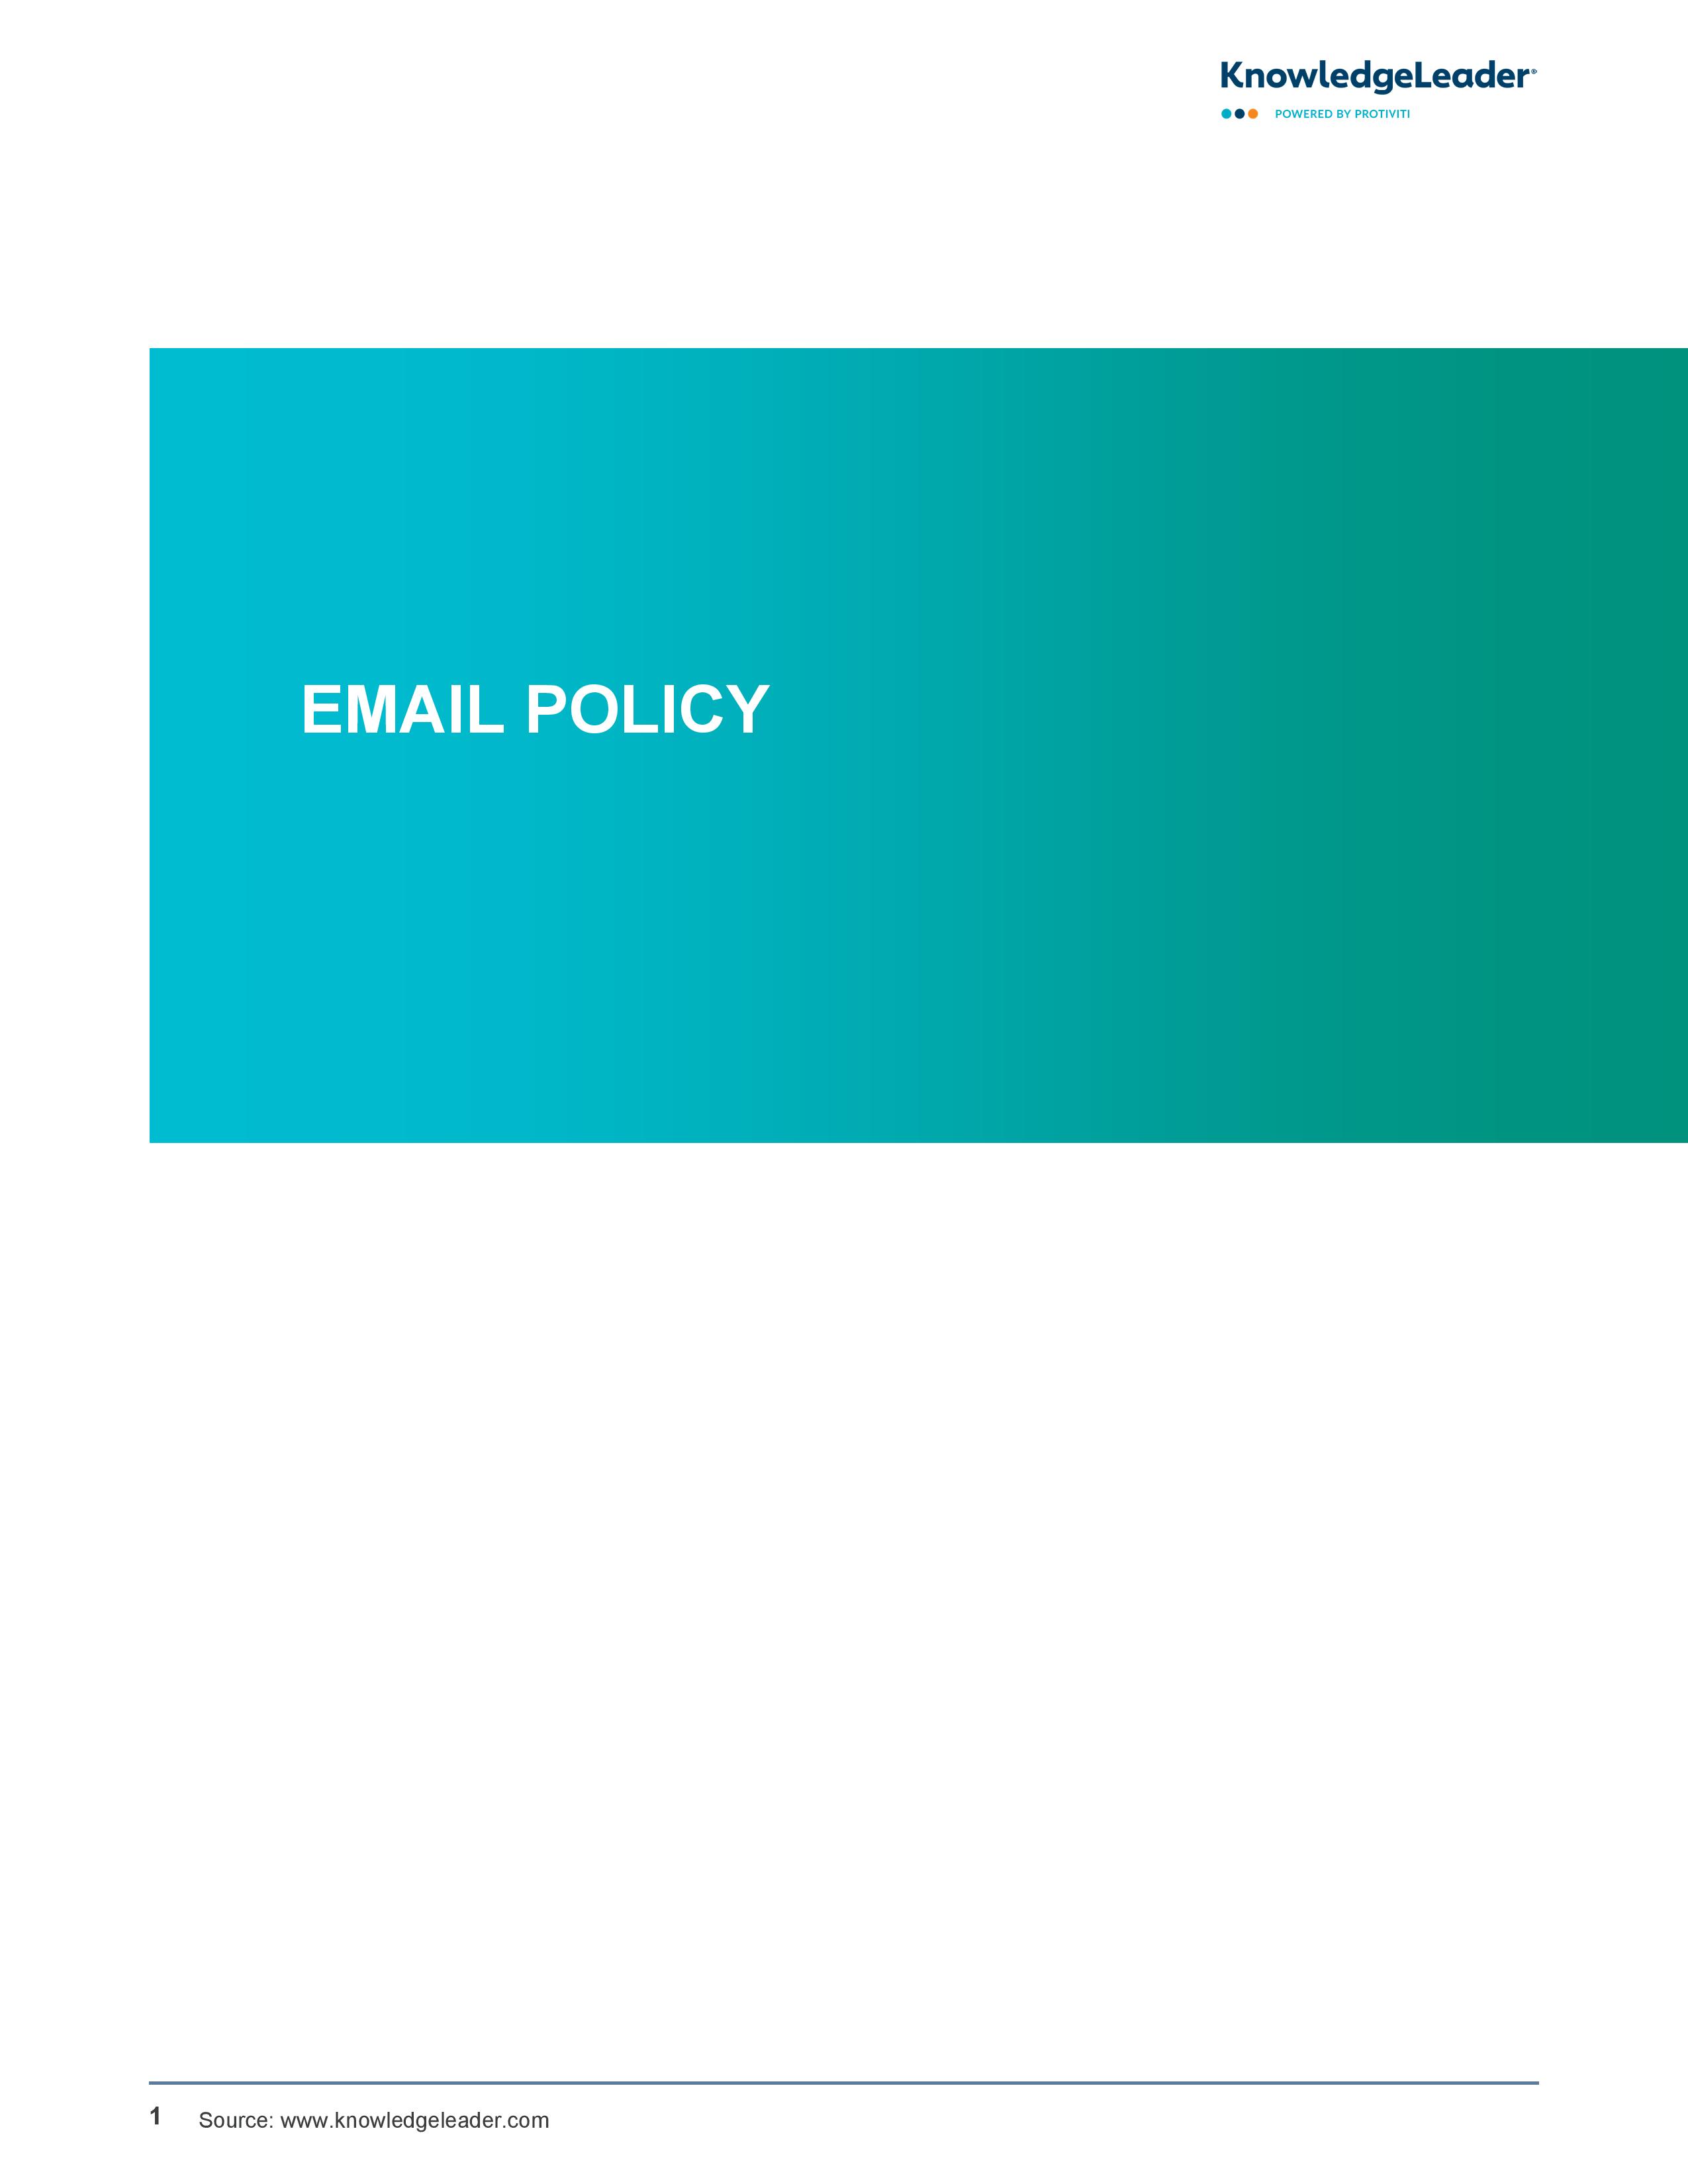 Screenshot of the first page of Email Policy